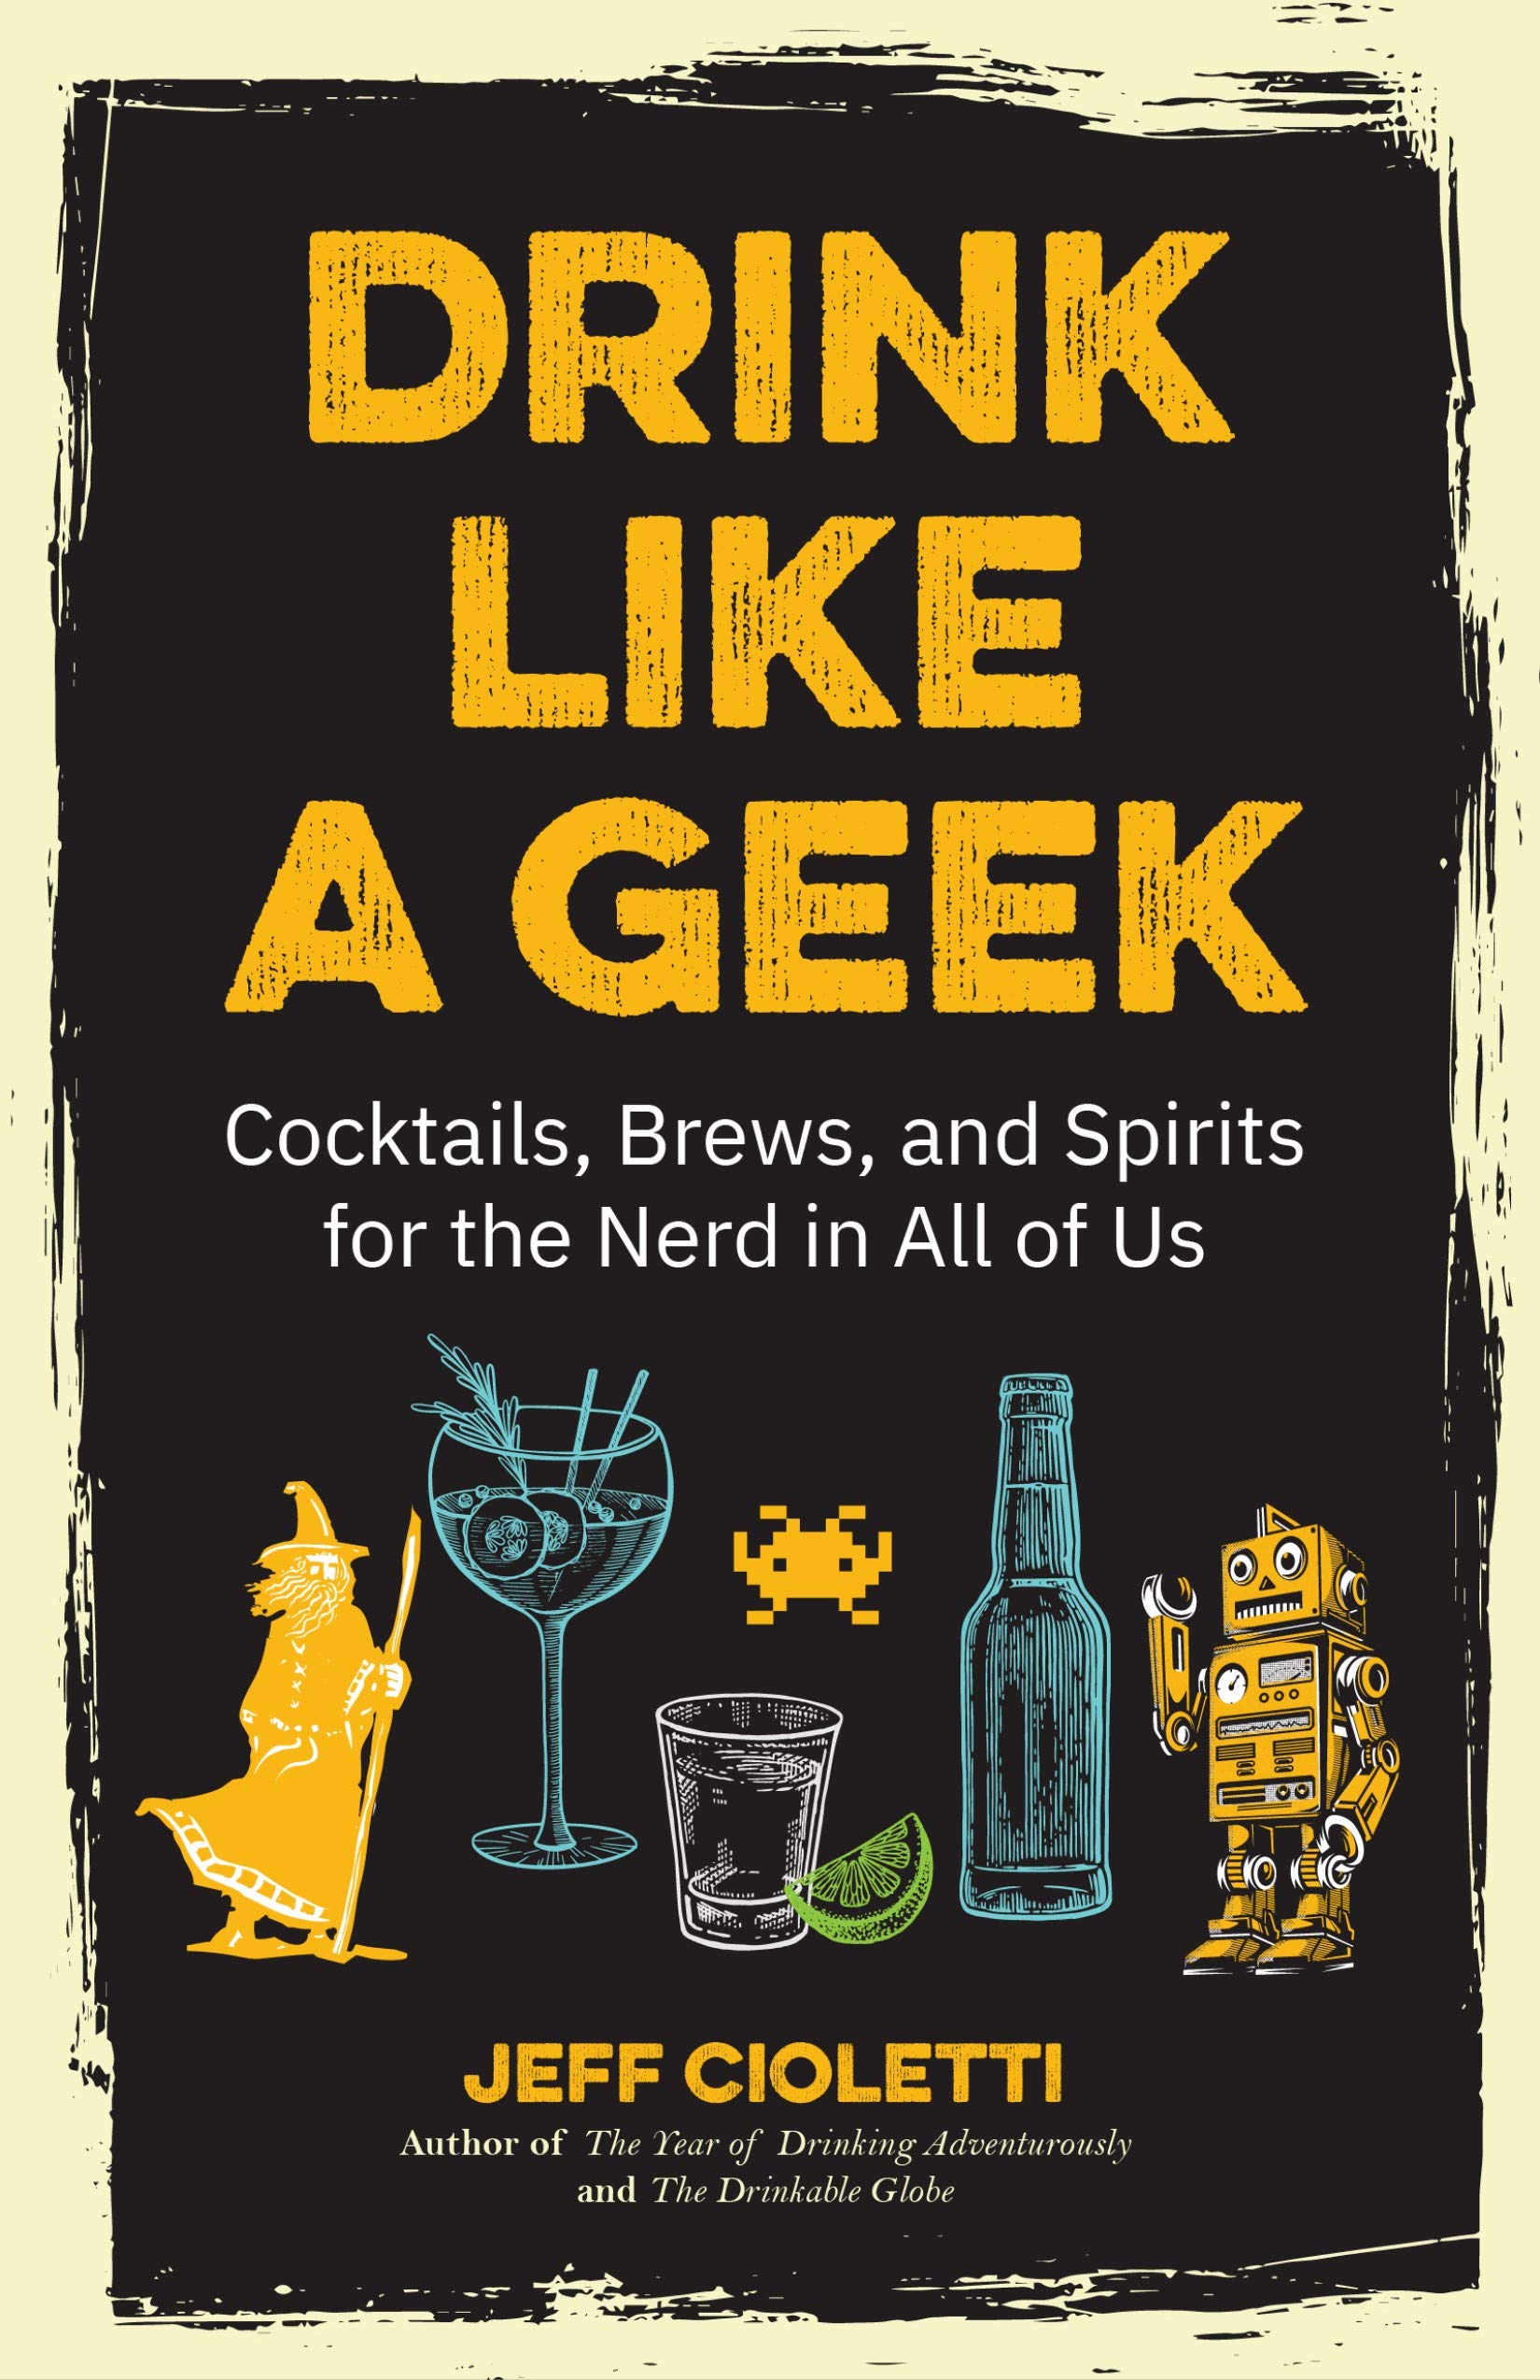 Drink Like a Geek: Cocktails, Brews, and Spirits for the Nerd in All of Us (Jeff Cioletti) *Signed*